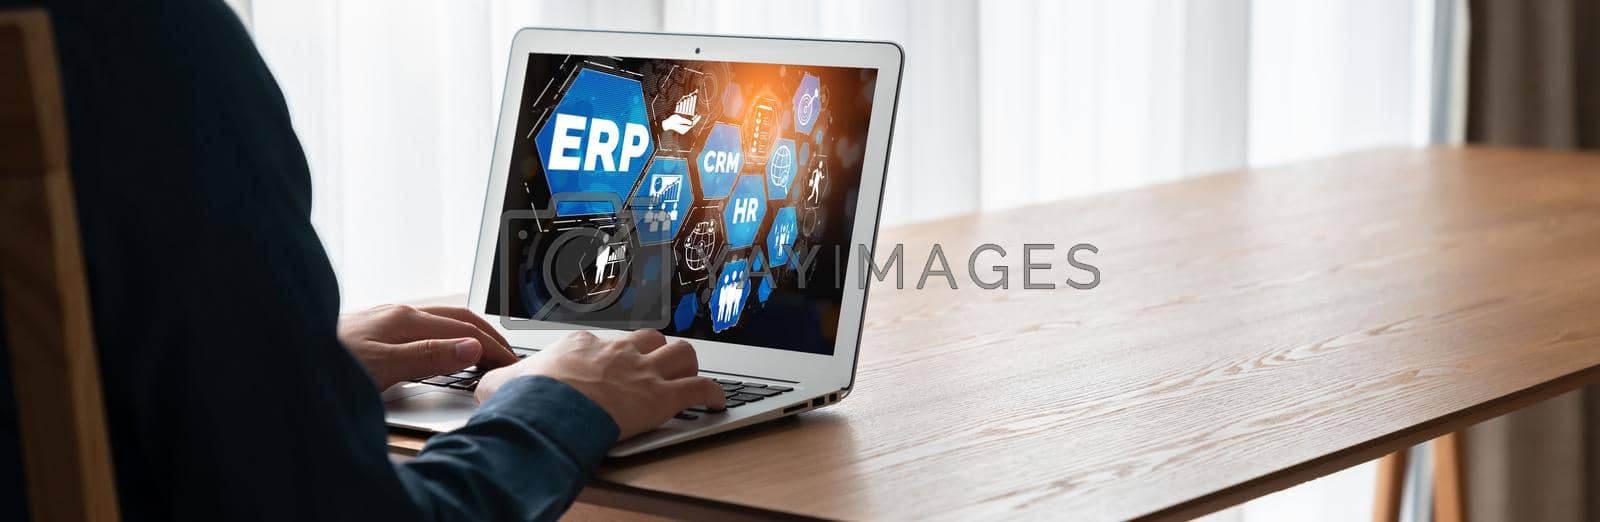 Royalty free image of ERP enterprise resource planning software for modish business by biancoblue